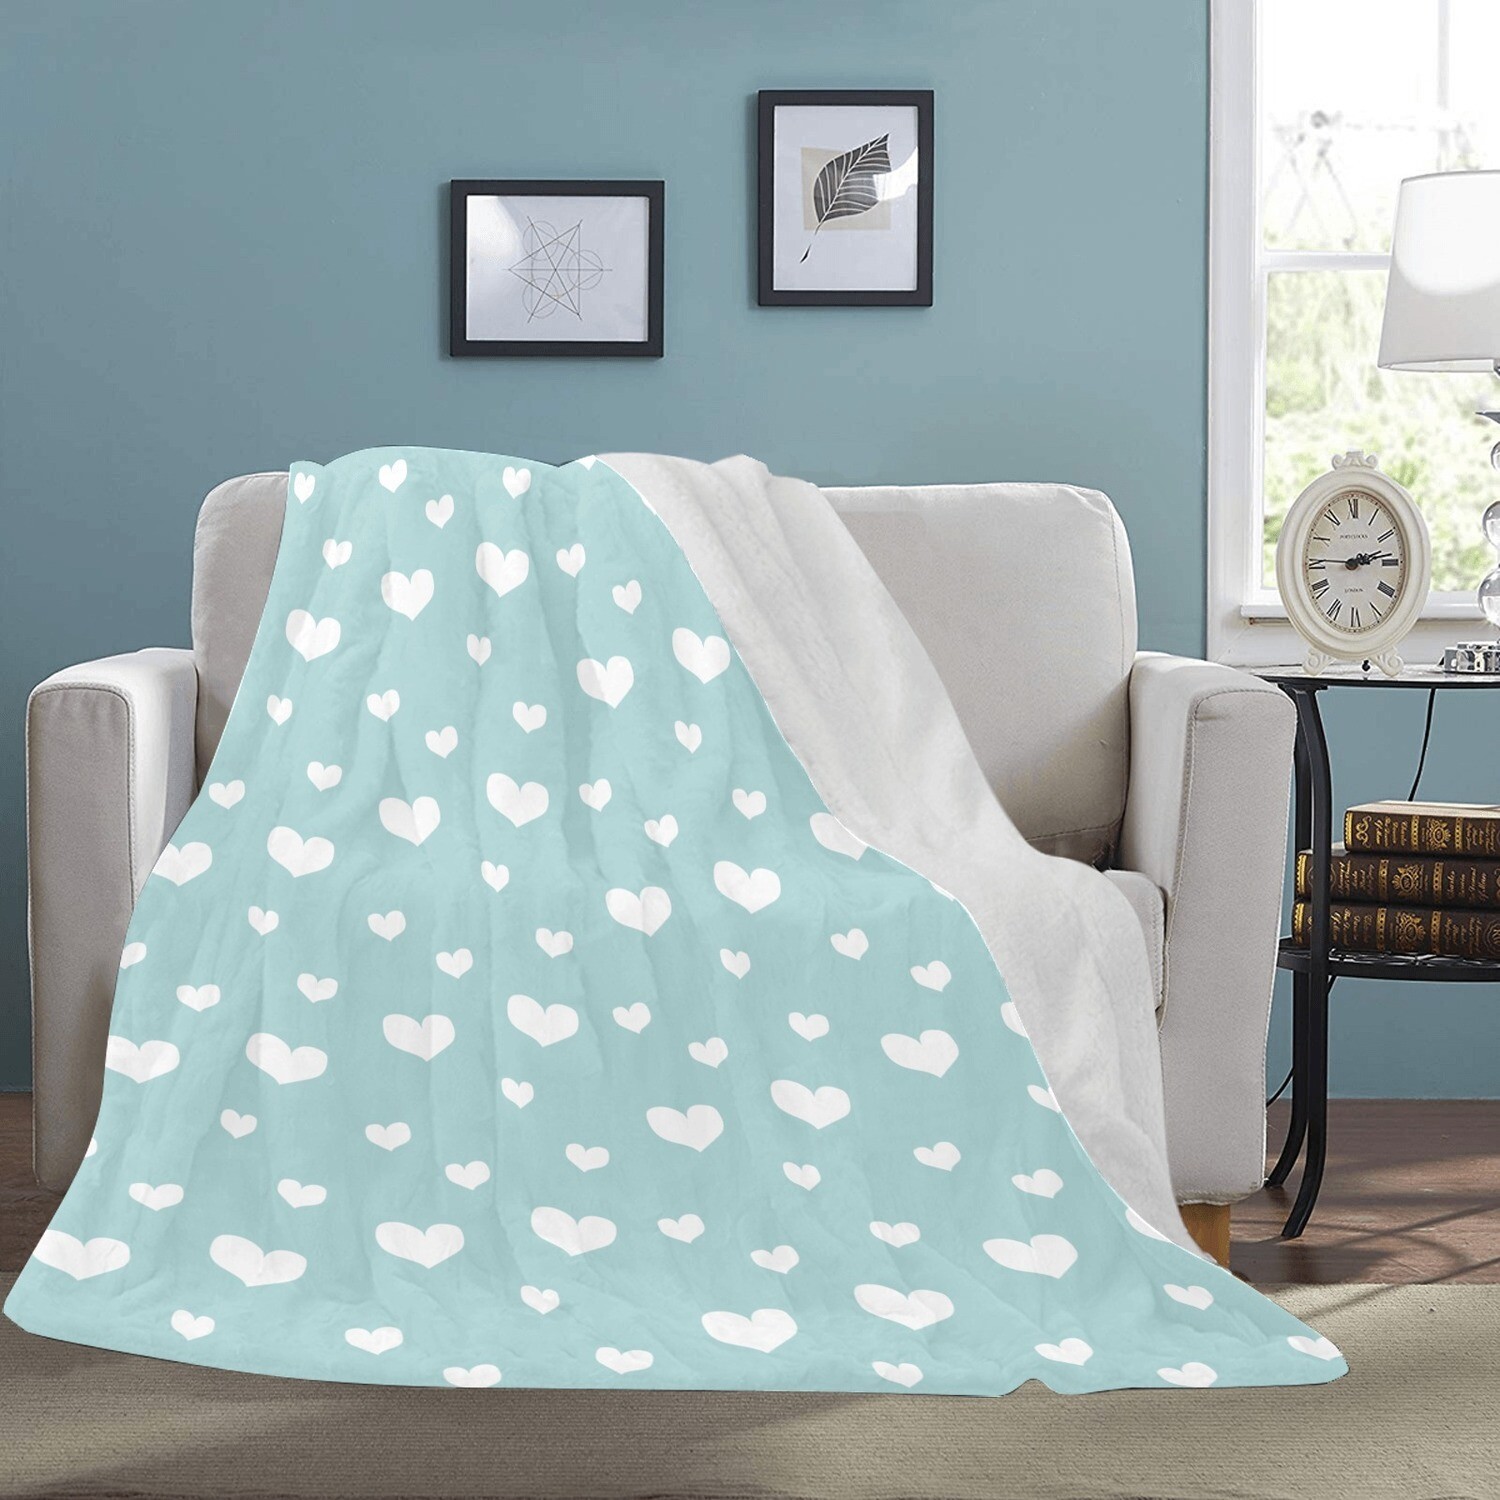 🤴🏽👸🏽💕Large Ultra-Soft Micro Fleece Blanket Valentine white hearts on light teal, gift, gift for her, gift for him, gift for them, 70"x80"